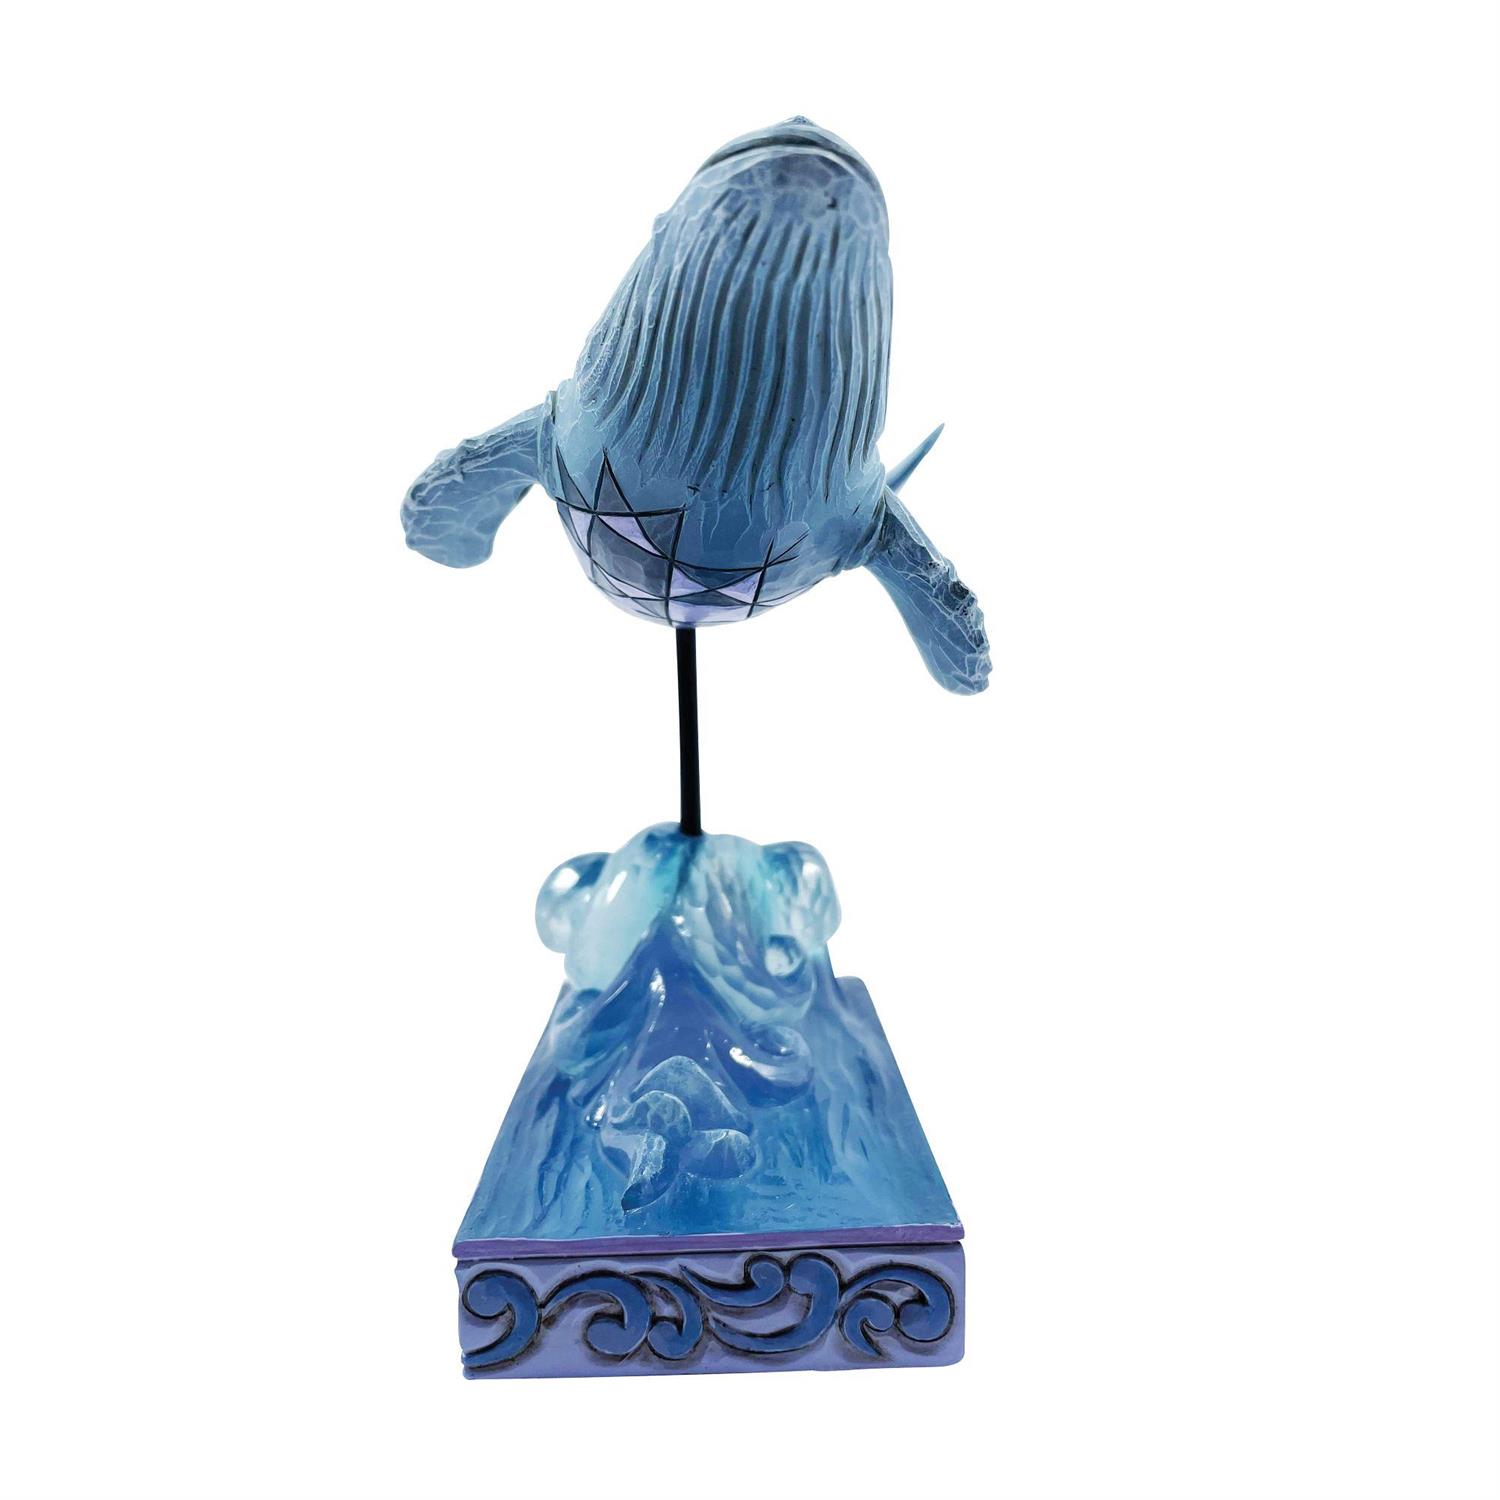 Enesco Gifts Jim Shore Animal Planet Blue Whales Figurine Free Shipping Iveys Gifts And Decor